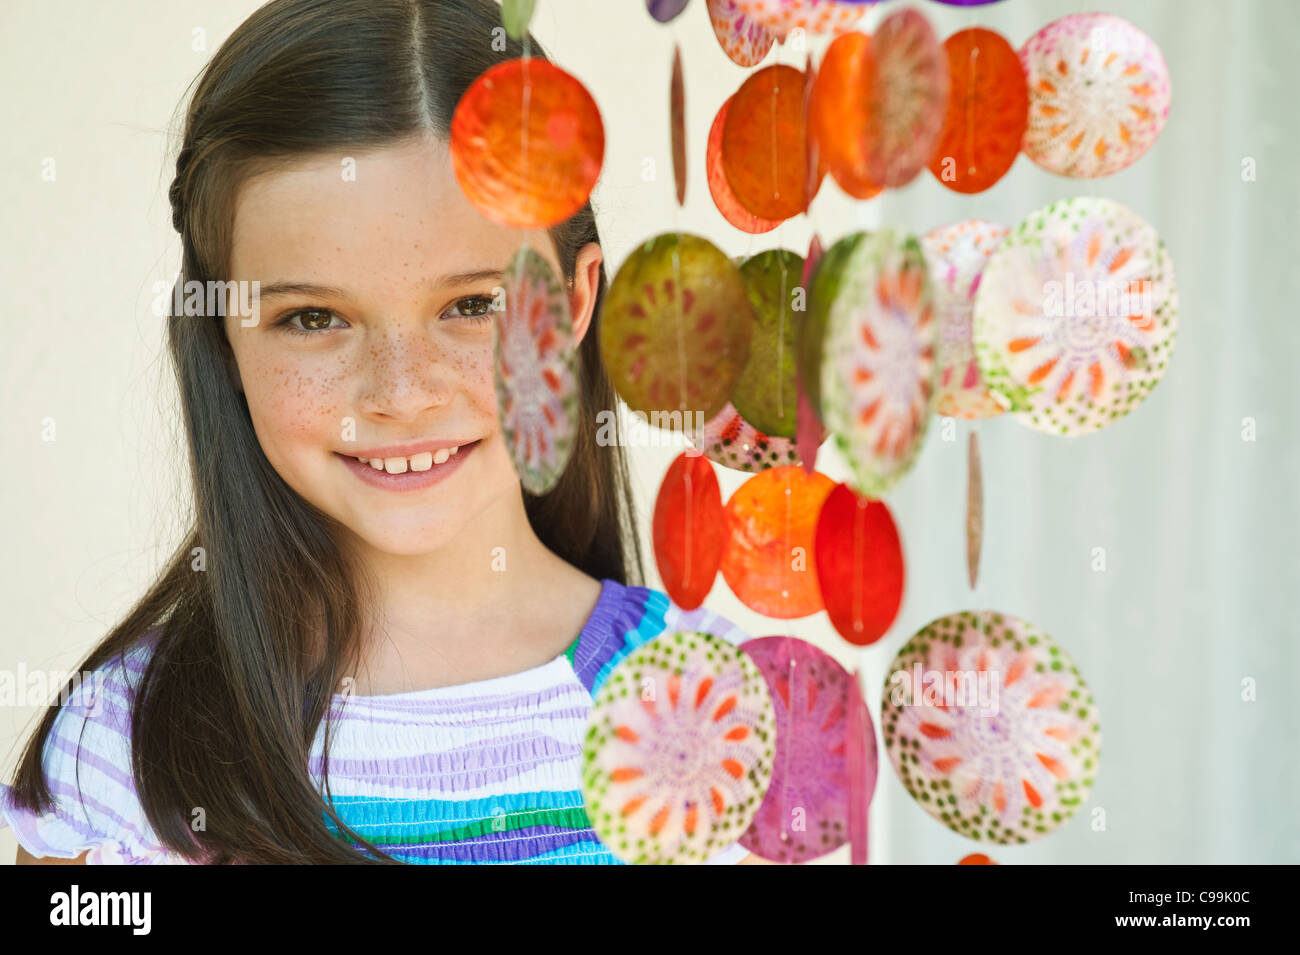 Germany, Bavaria, Girl with decorative sea shells wind chime, smiling, portrait Stock Photo